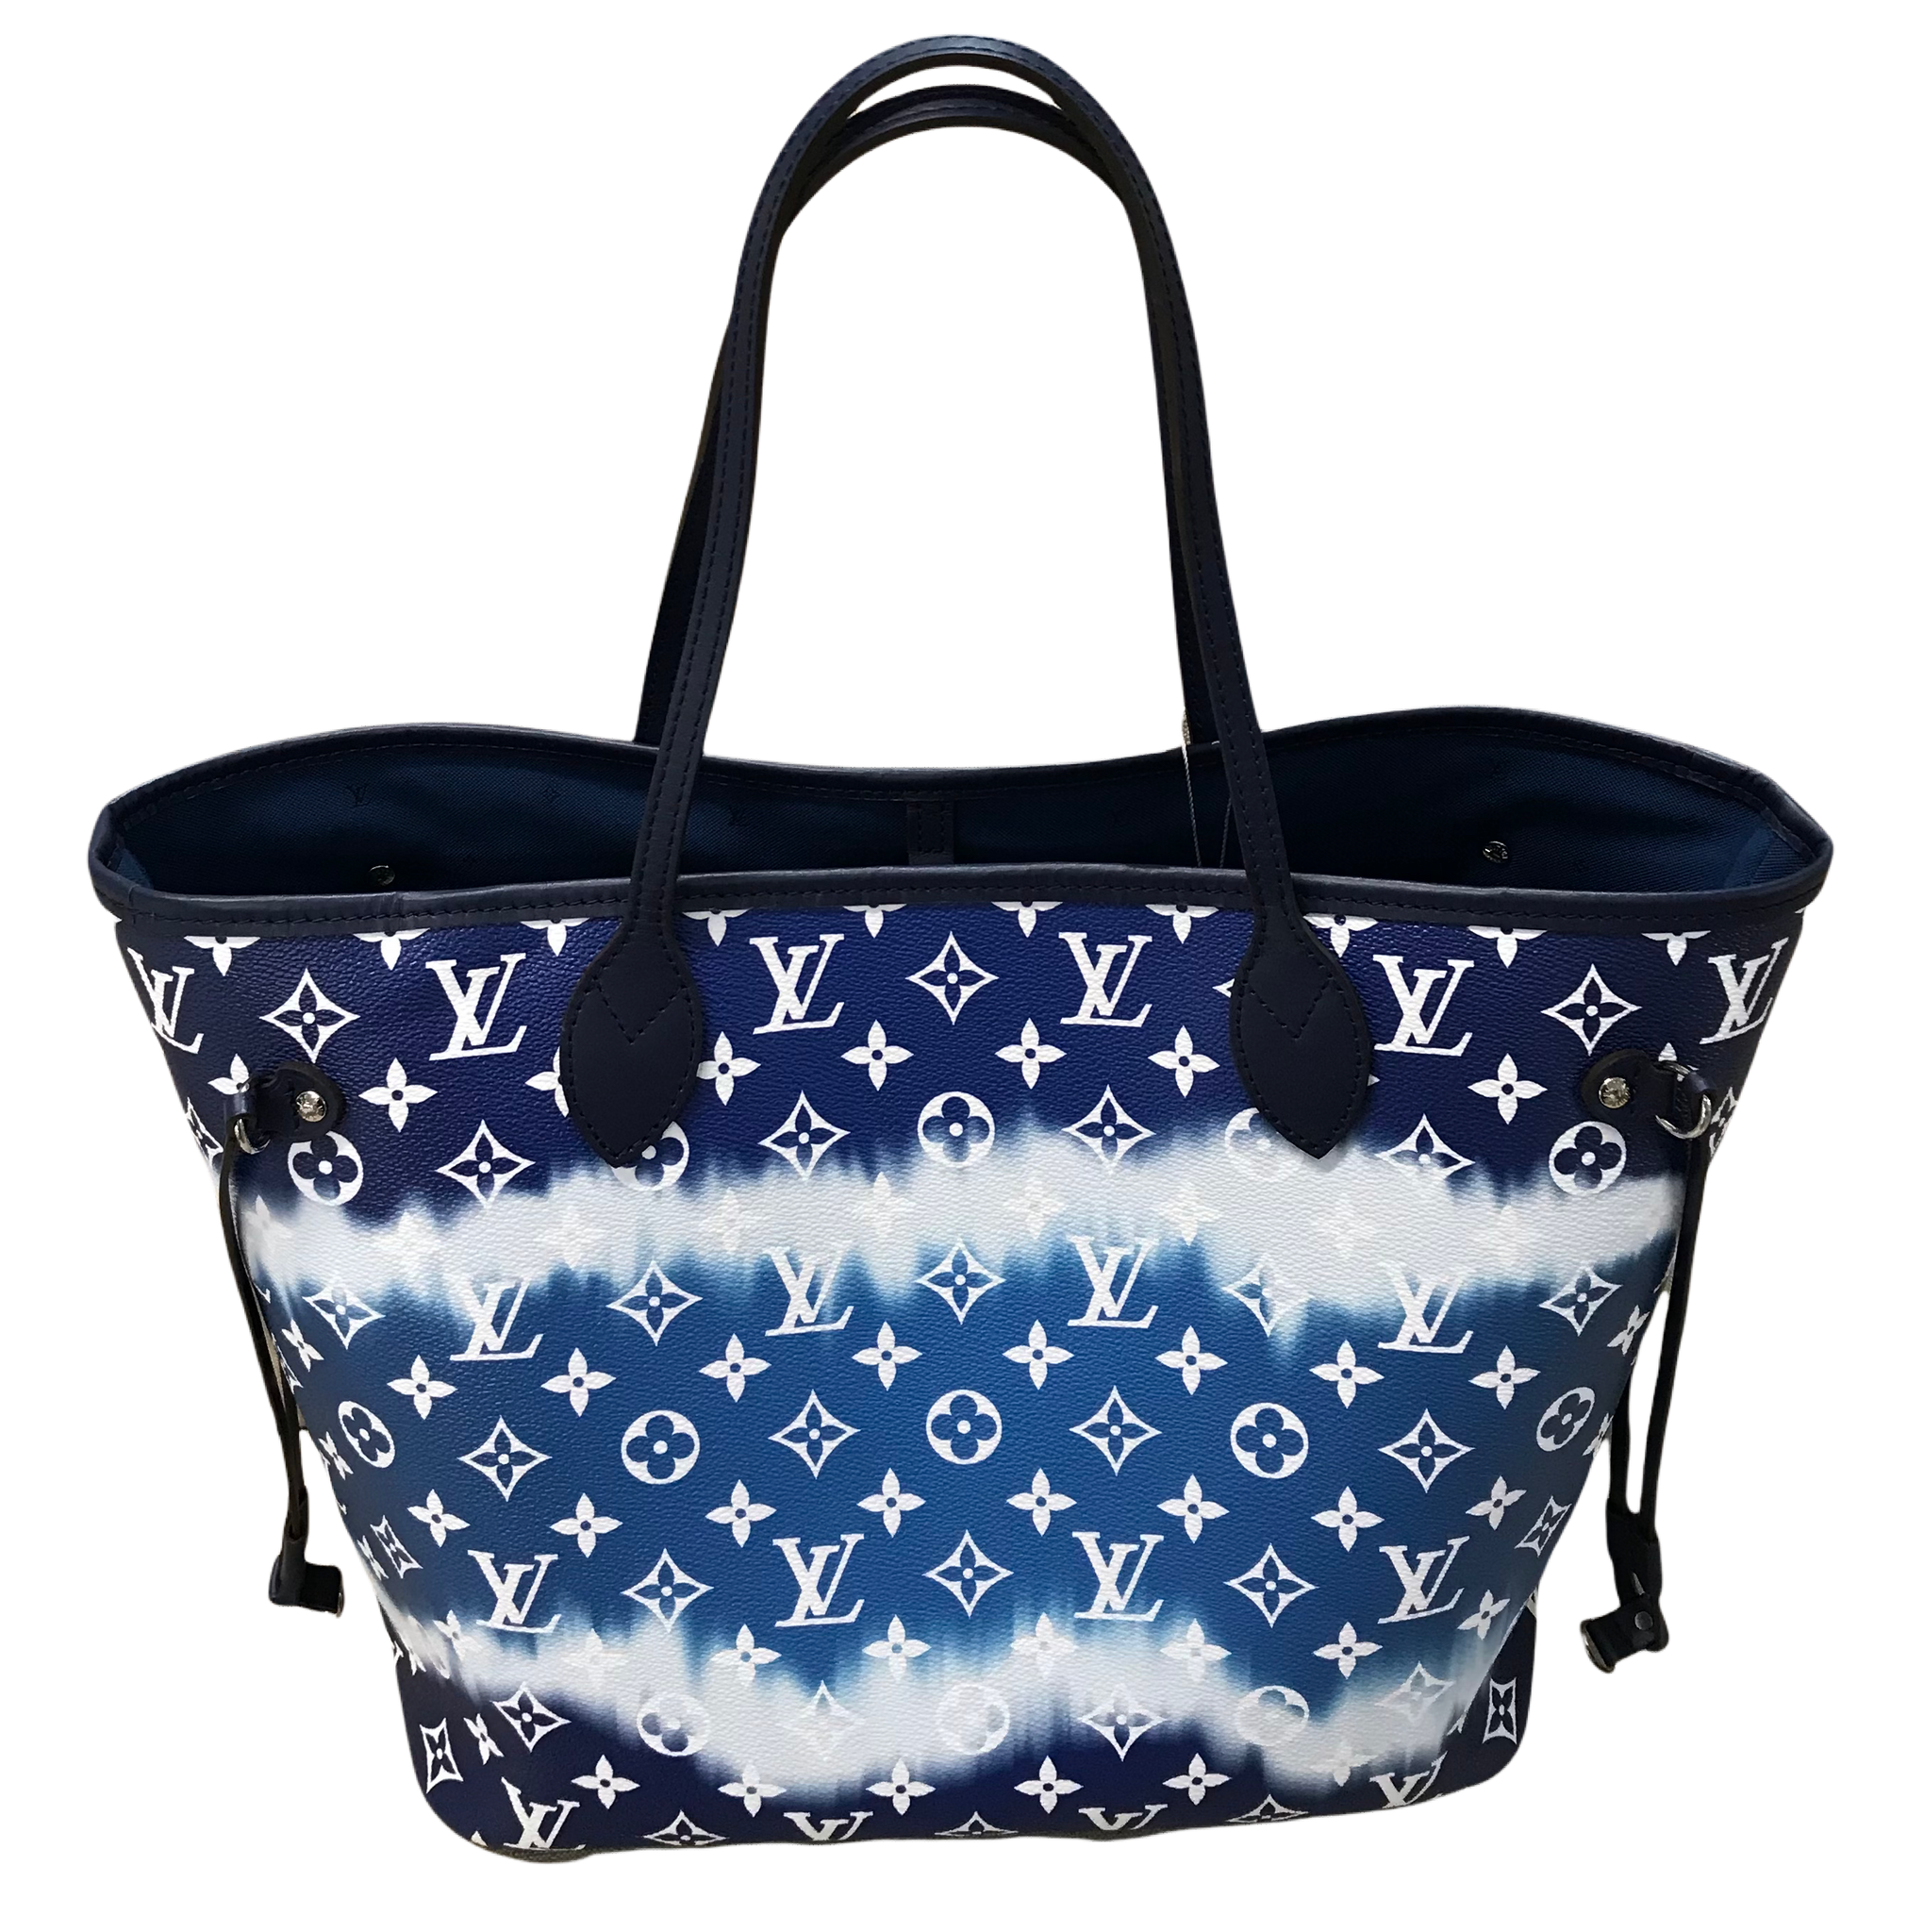 Louis Vuitton Bags Louis Vuitton M4528 Lv Escale Neverfull Mm Bleu Poshmark.pdf  - ! Listings SELL Search Listings LOGIN FREE authentication and FREE